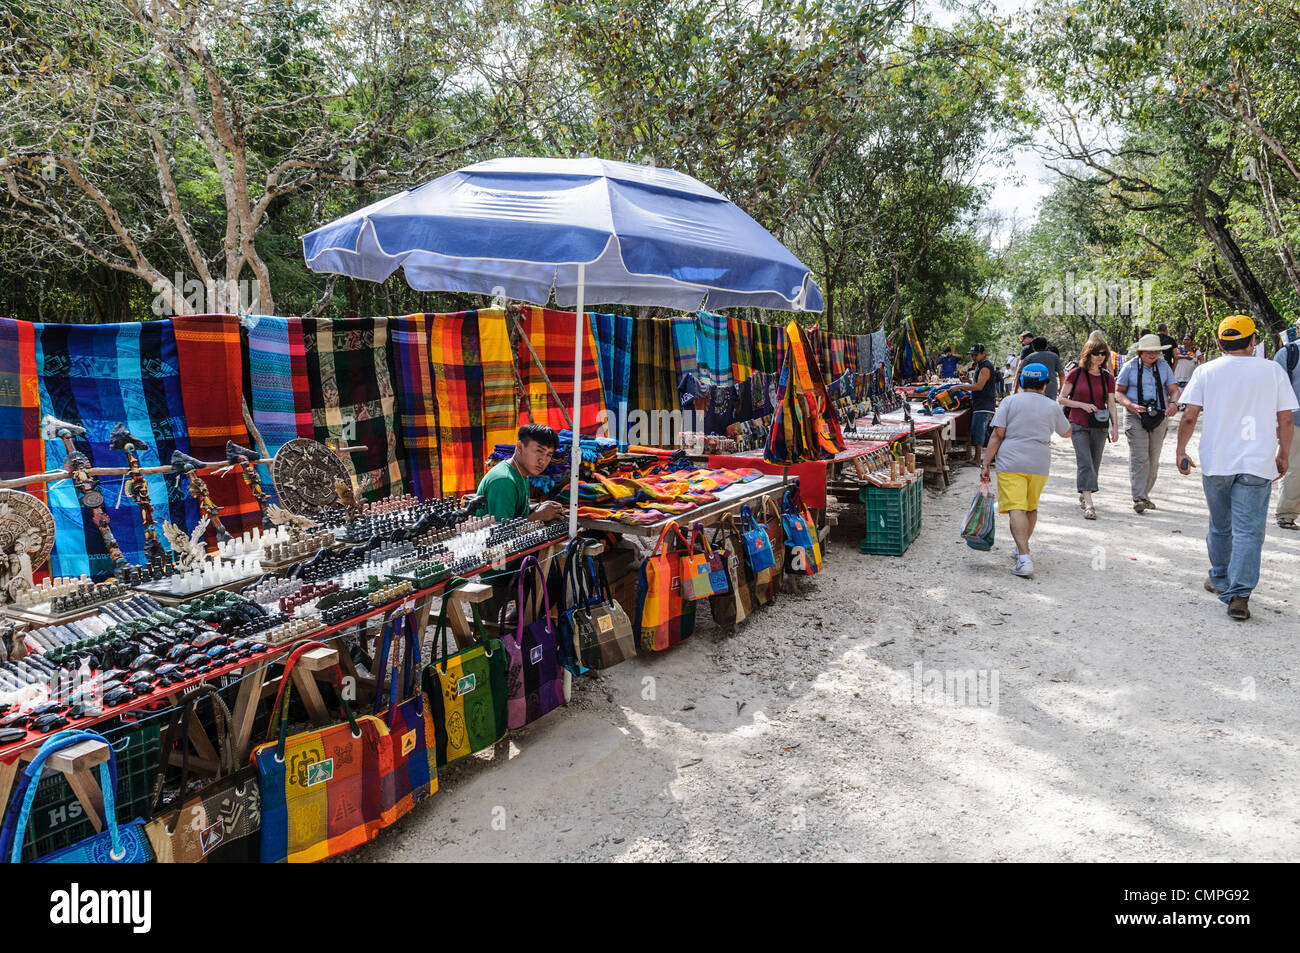 CHICHEN ITZA, Mexico - Market stalls selling local souvenirs and handicrafts to tourists visiting Chichen Itza Mayan ruins archeological site in Yucatan, Mexico. Stock Photo